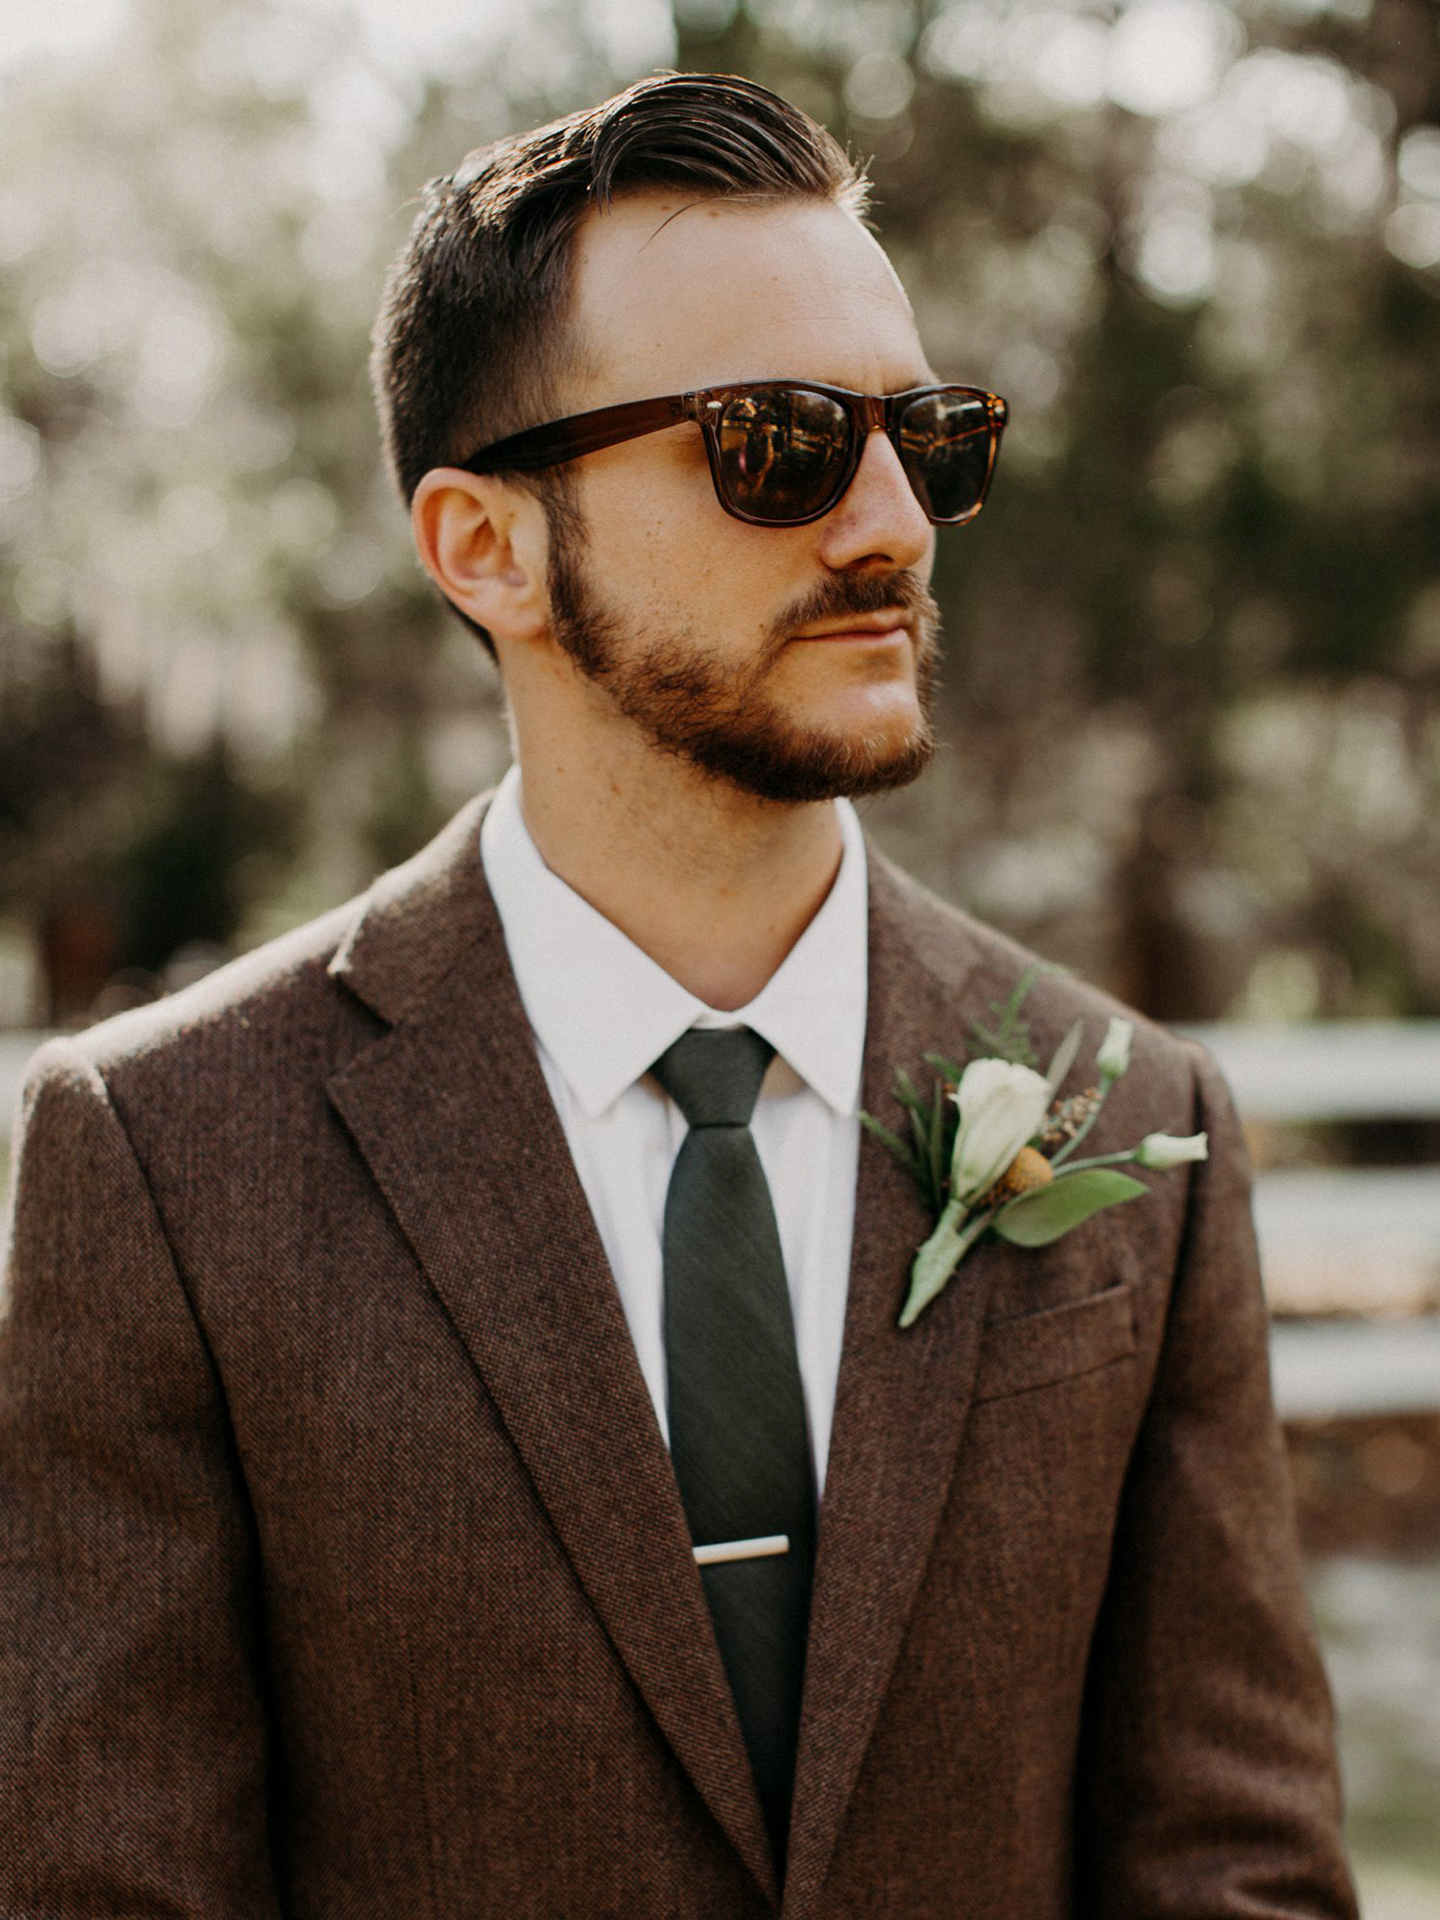 Brown suit jacket with white shirt and green tie for wedding